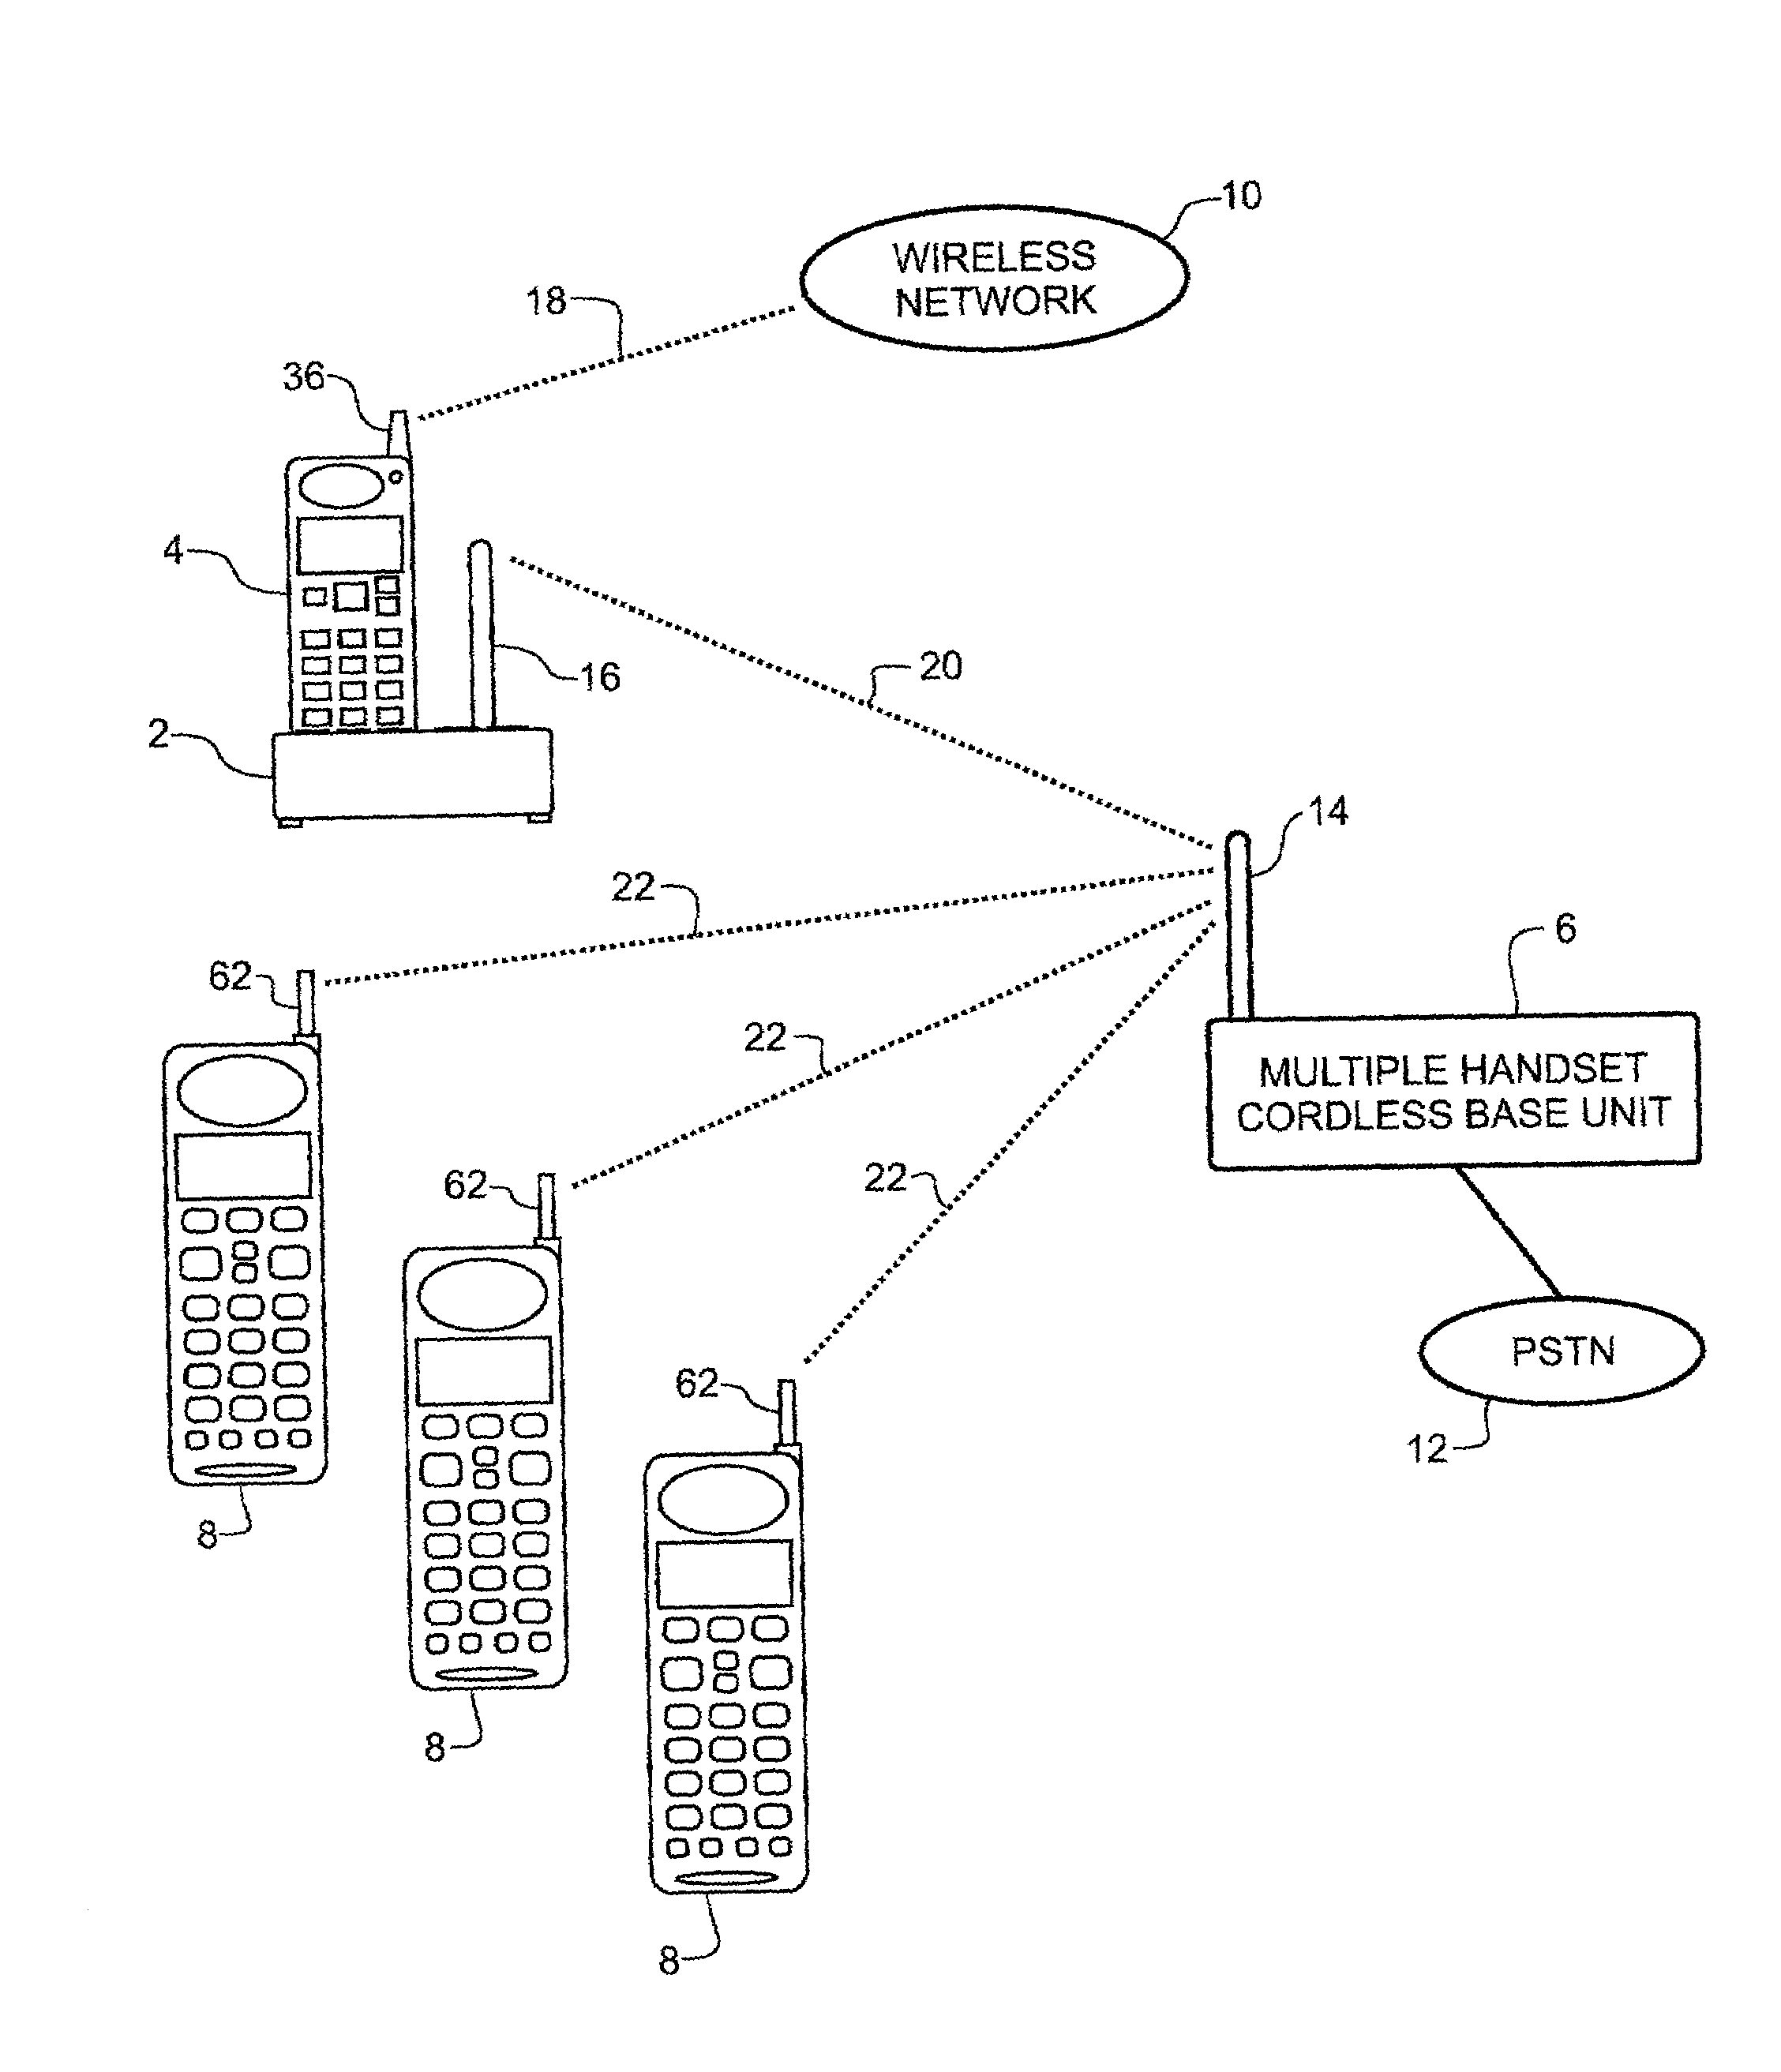 Wireless docking station system and method for a multiple handset cordless telephone system